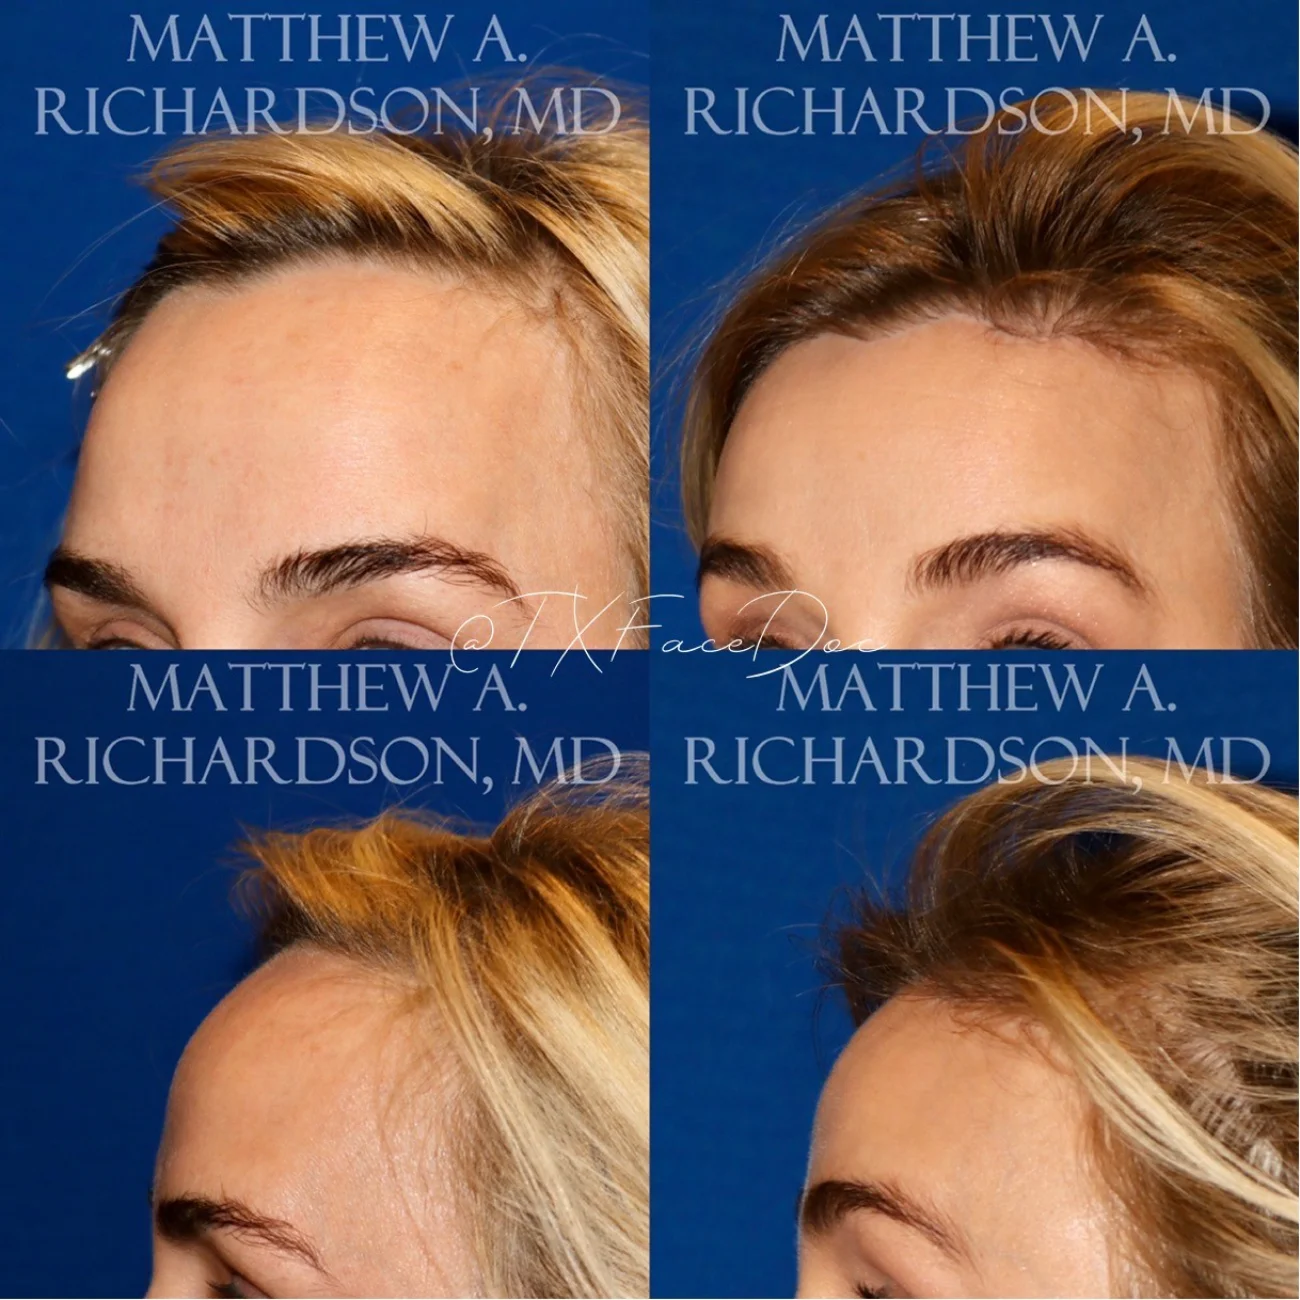 Hairline Lowering Surgery Before and After Performed by Matthew A. Richardson, MD